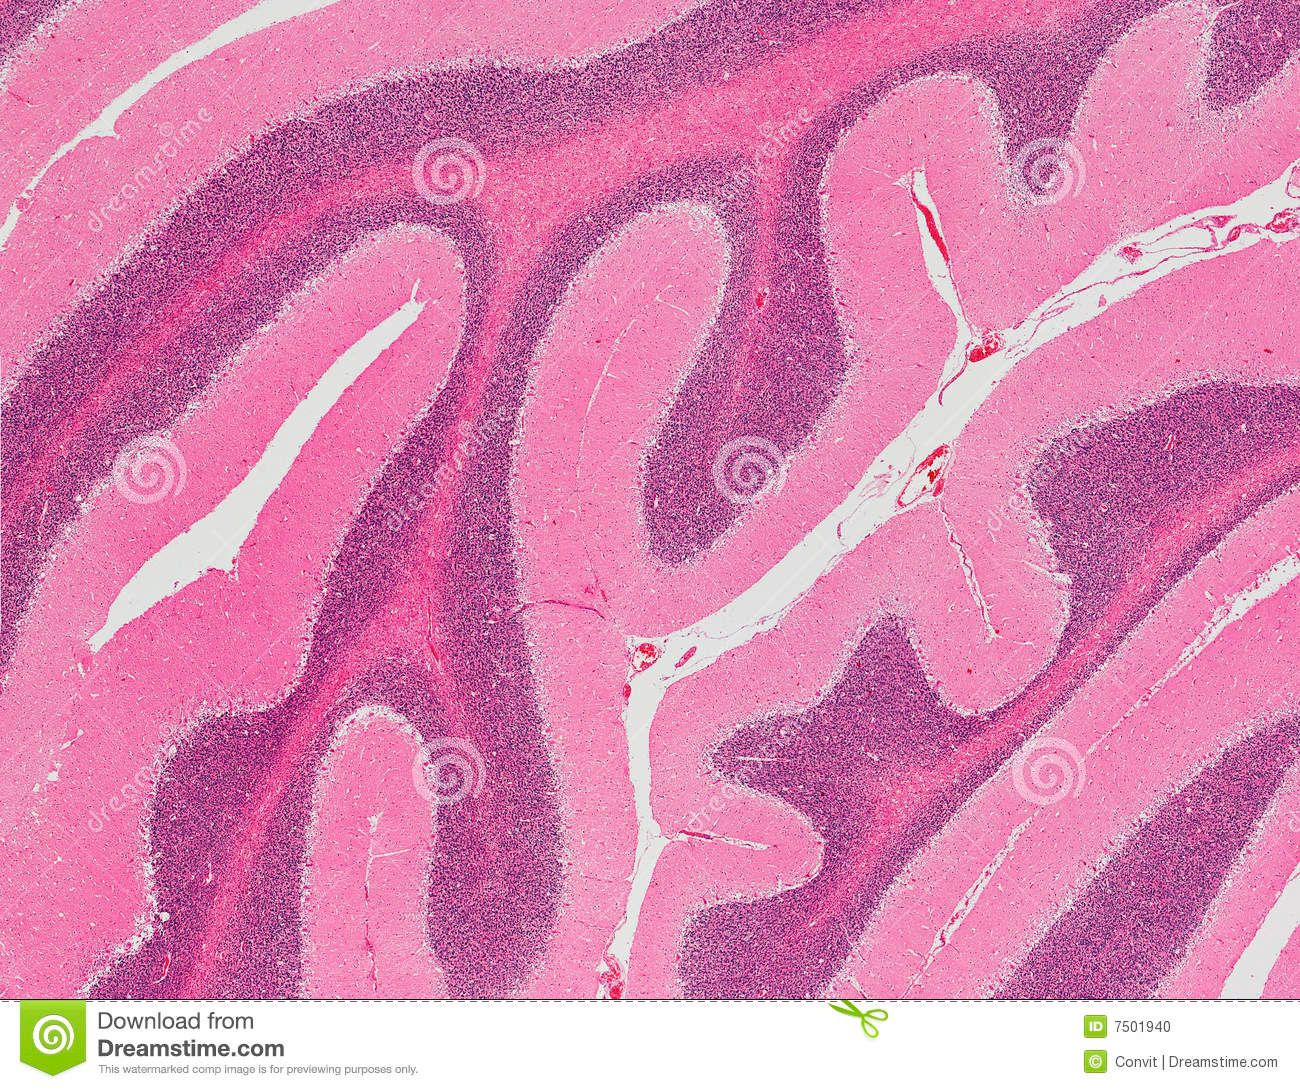 Pin by David Hill on Histology